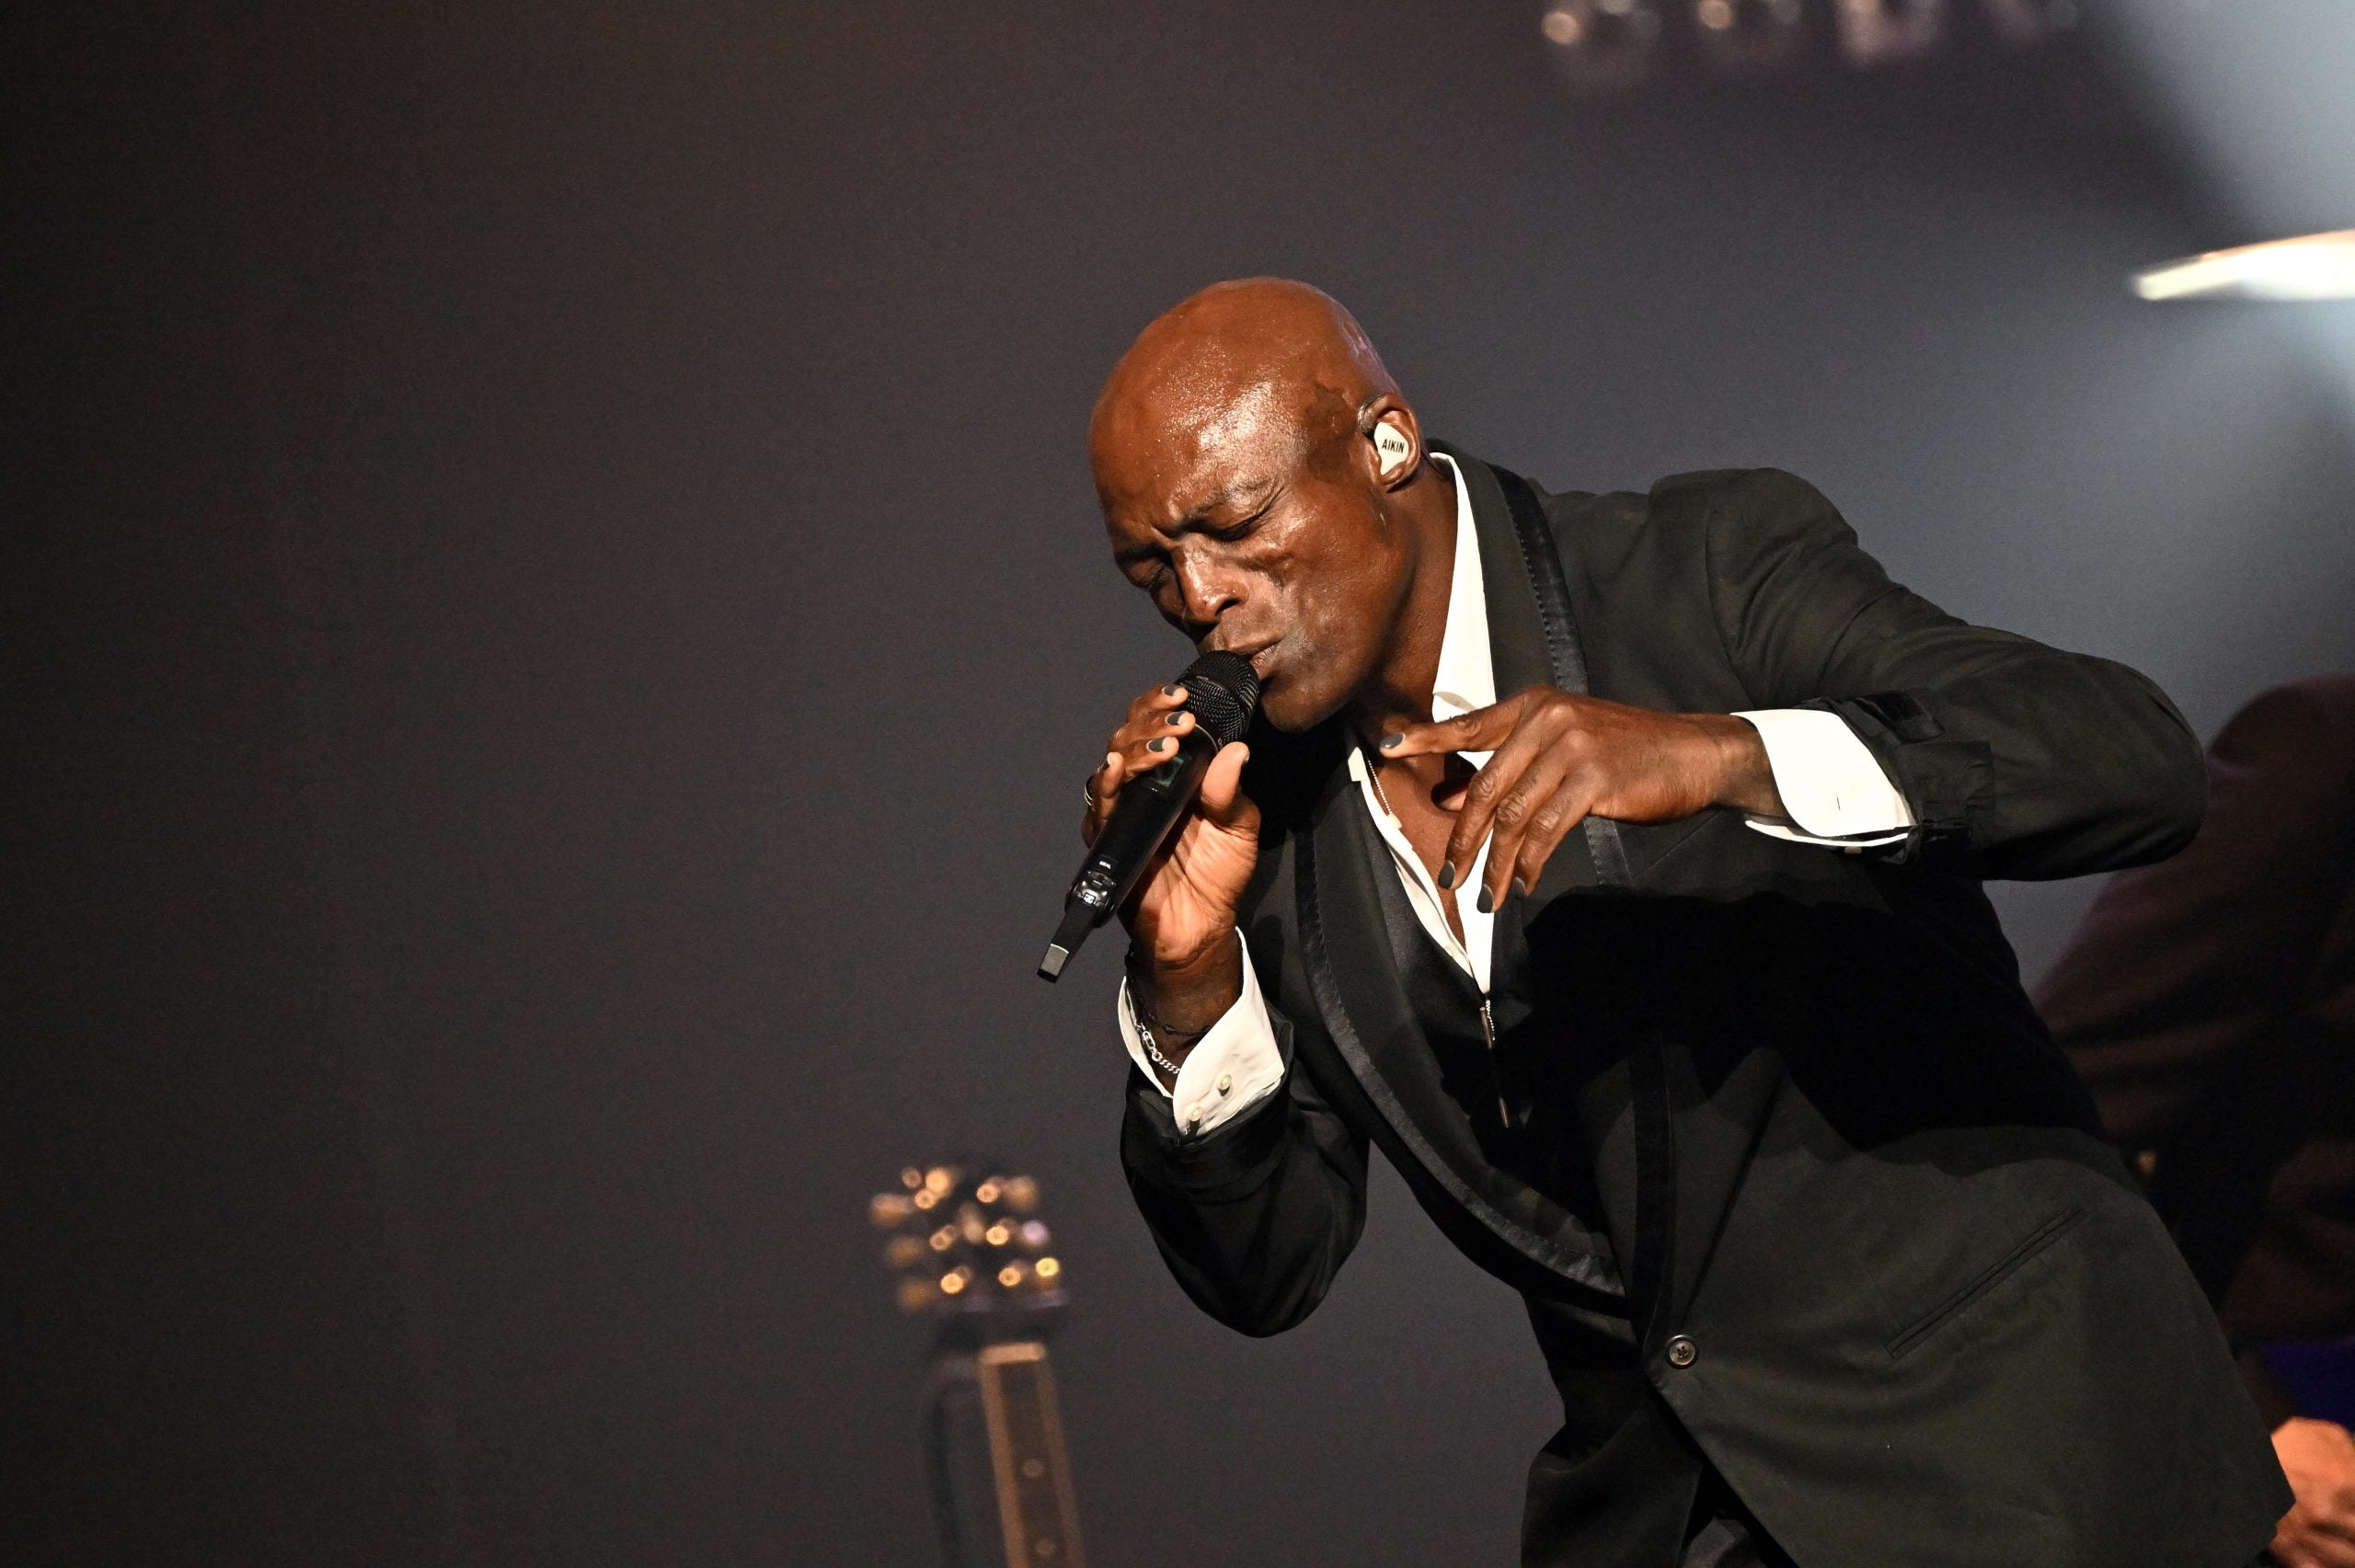 Seal Honors Tina Turner During NYC Concert: "You'll Always Be Loved"